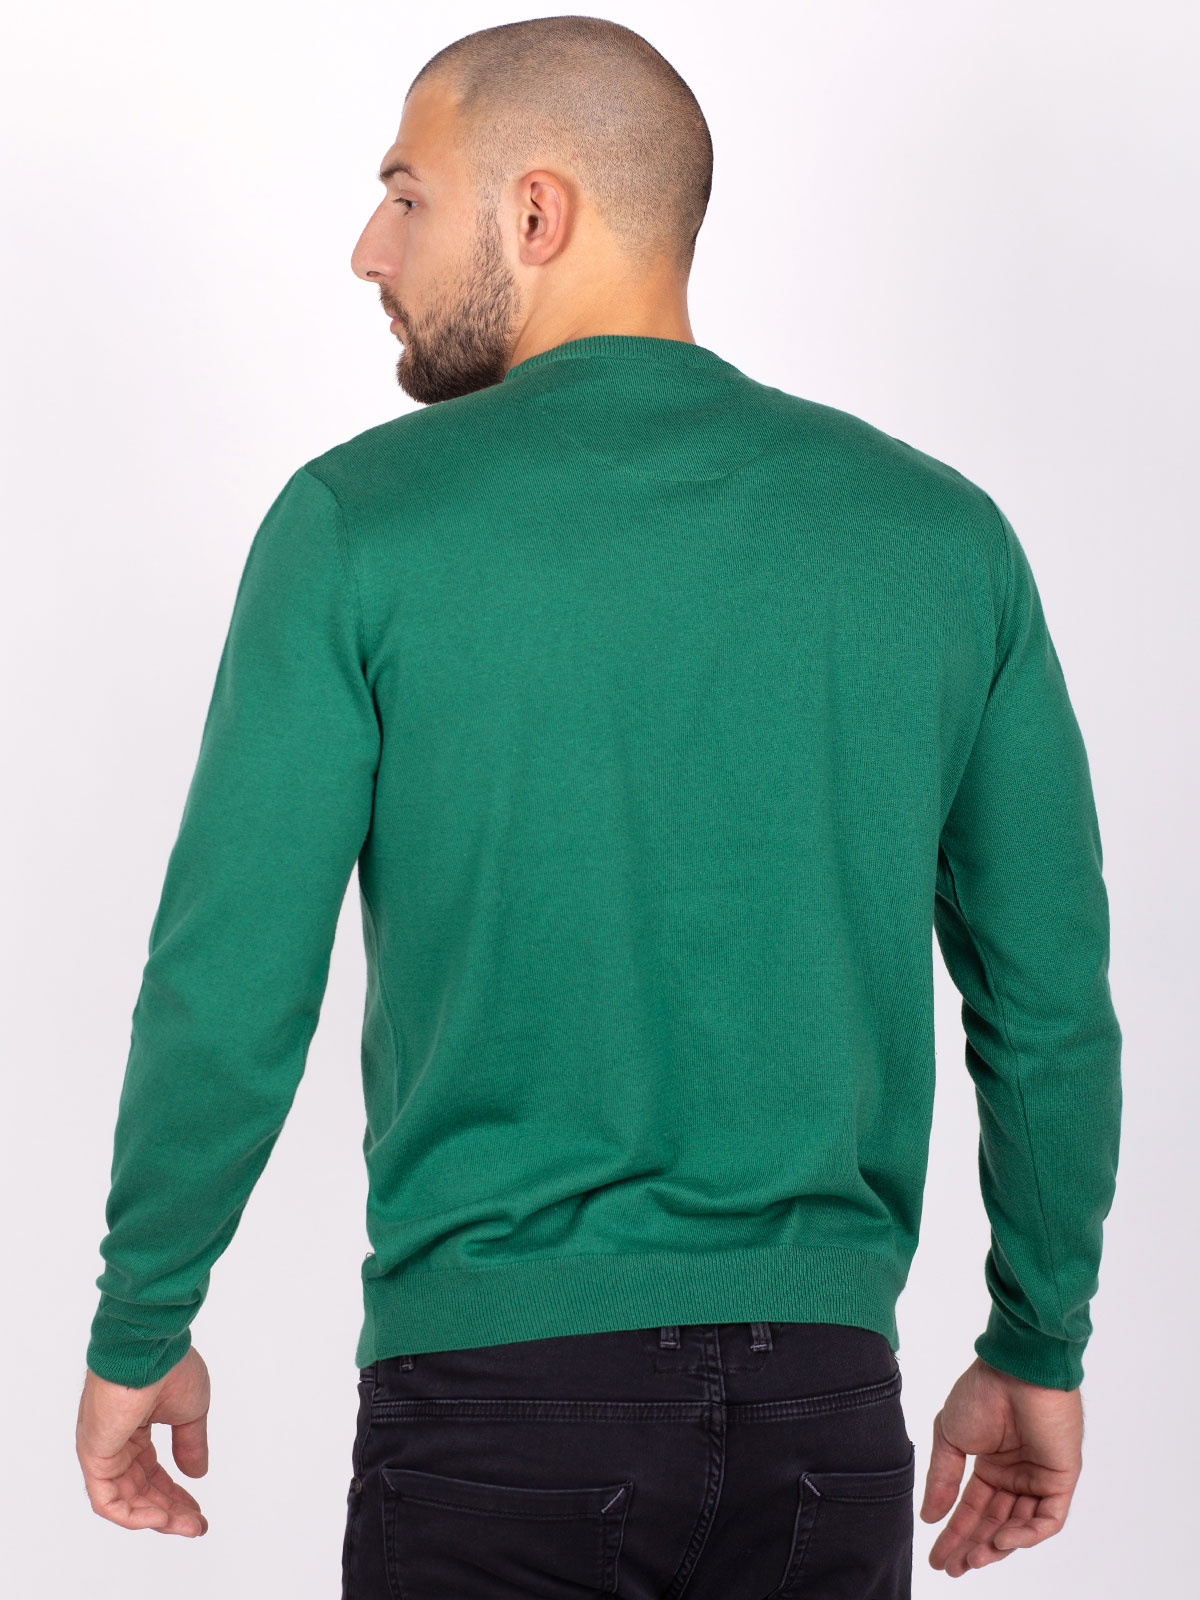 Cotton and acrylic sweater in green - 35301 € 37.12 img3